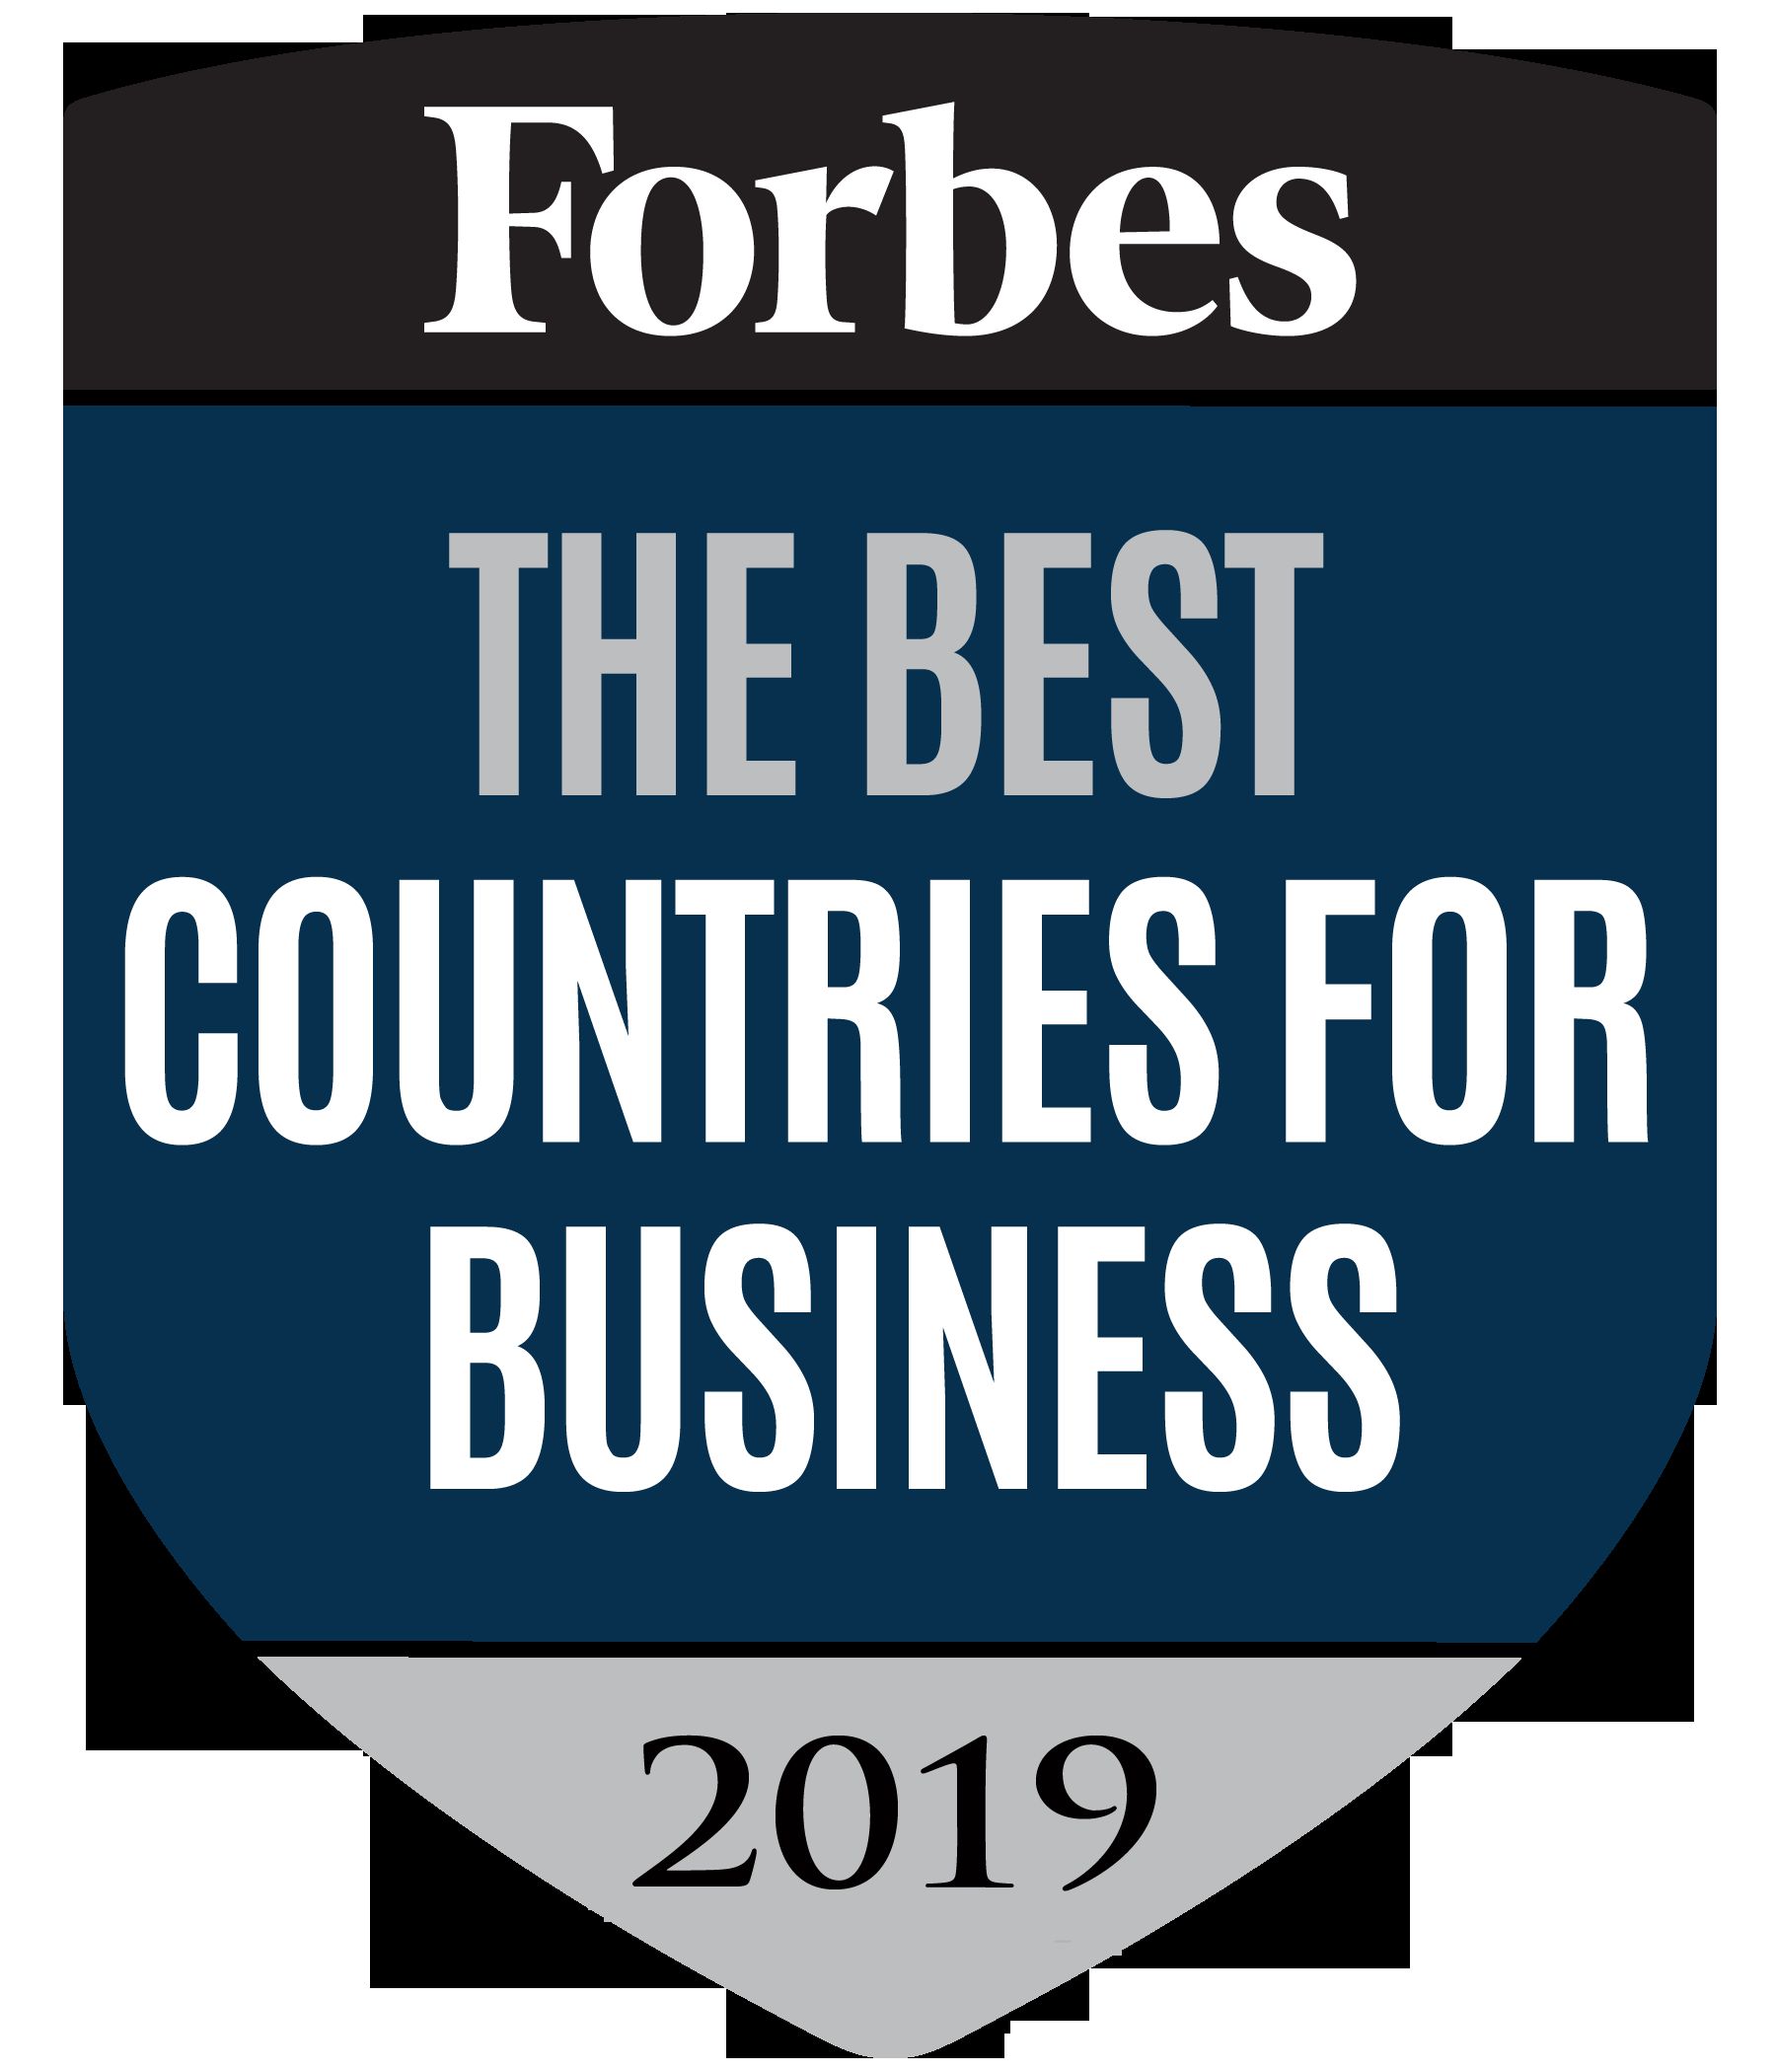 International Business Articles forbes Best Countries for Business List